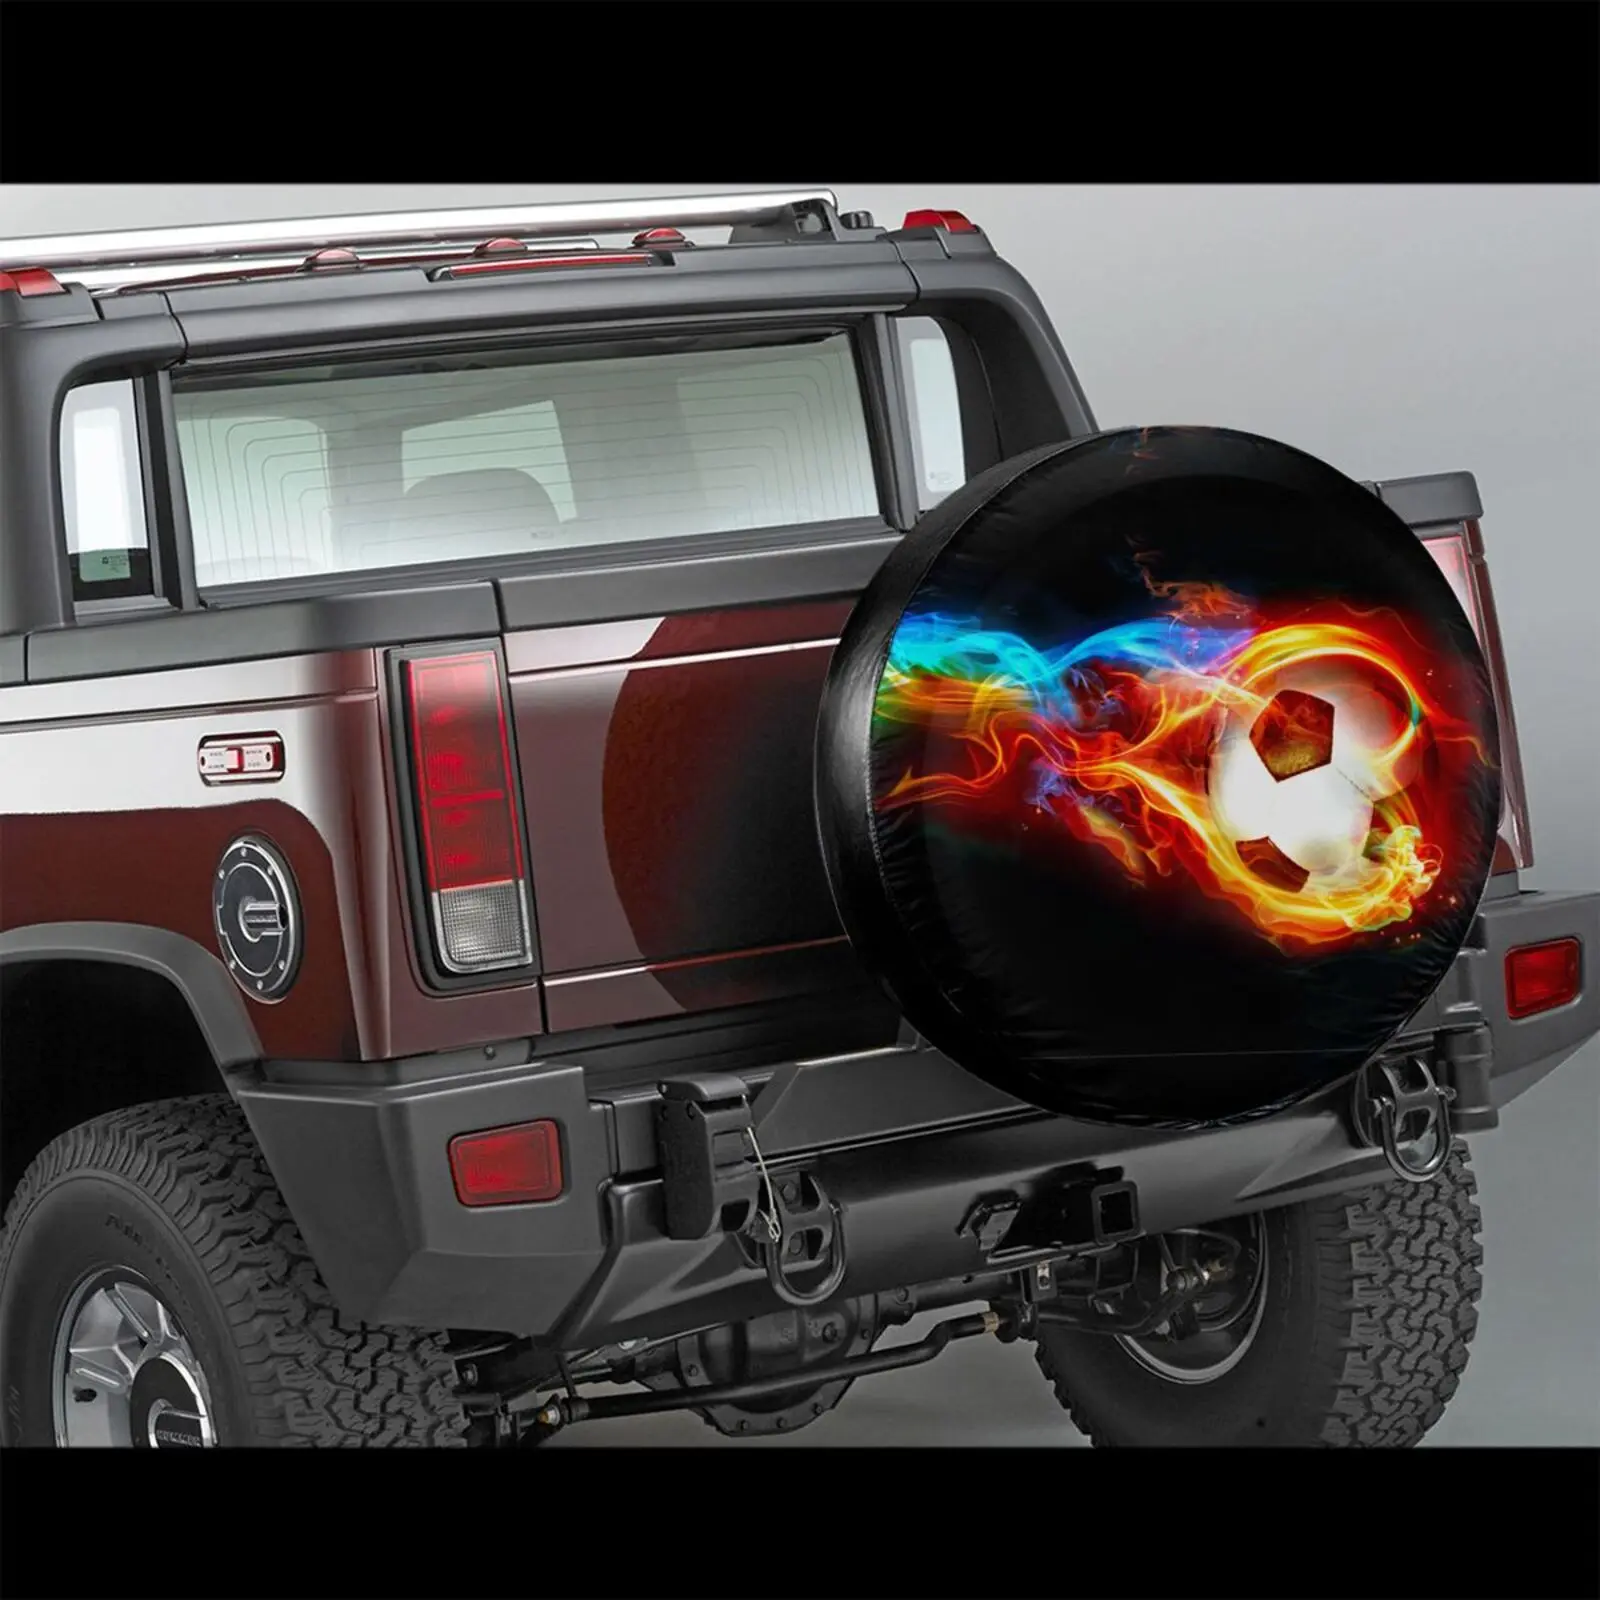 

3d Custom Print Wheel Tire Caps Flame Football Rugby Design Universal Fits Most Cars Spare Tire Cover for Fj Cruiser